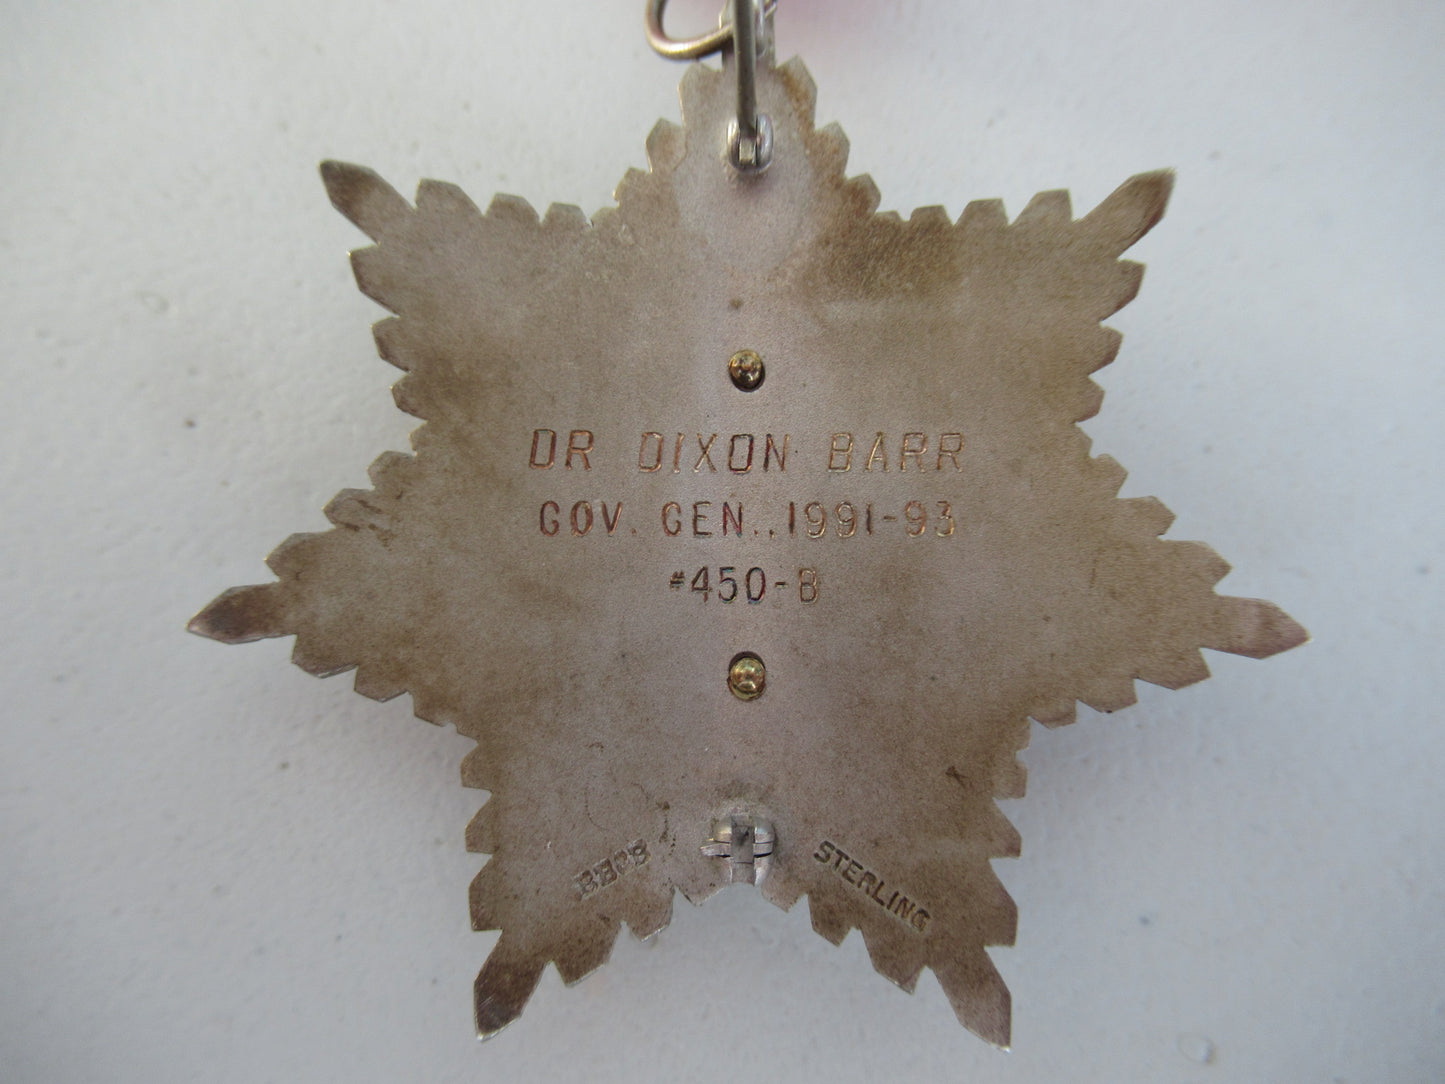 USA SOCIETY BADGE FOR THE HEREDITARY ORDER OF DECENDANTS OF COLONIAL GOVERNORS. SPECIAL NECK BADGE GRADE.